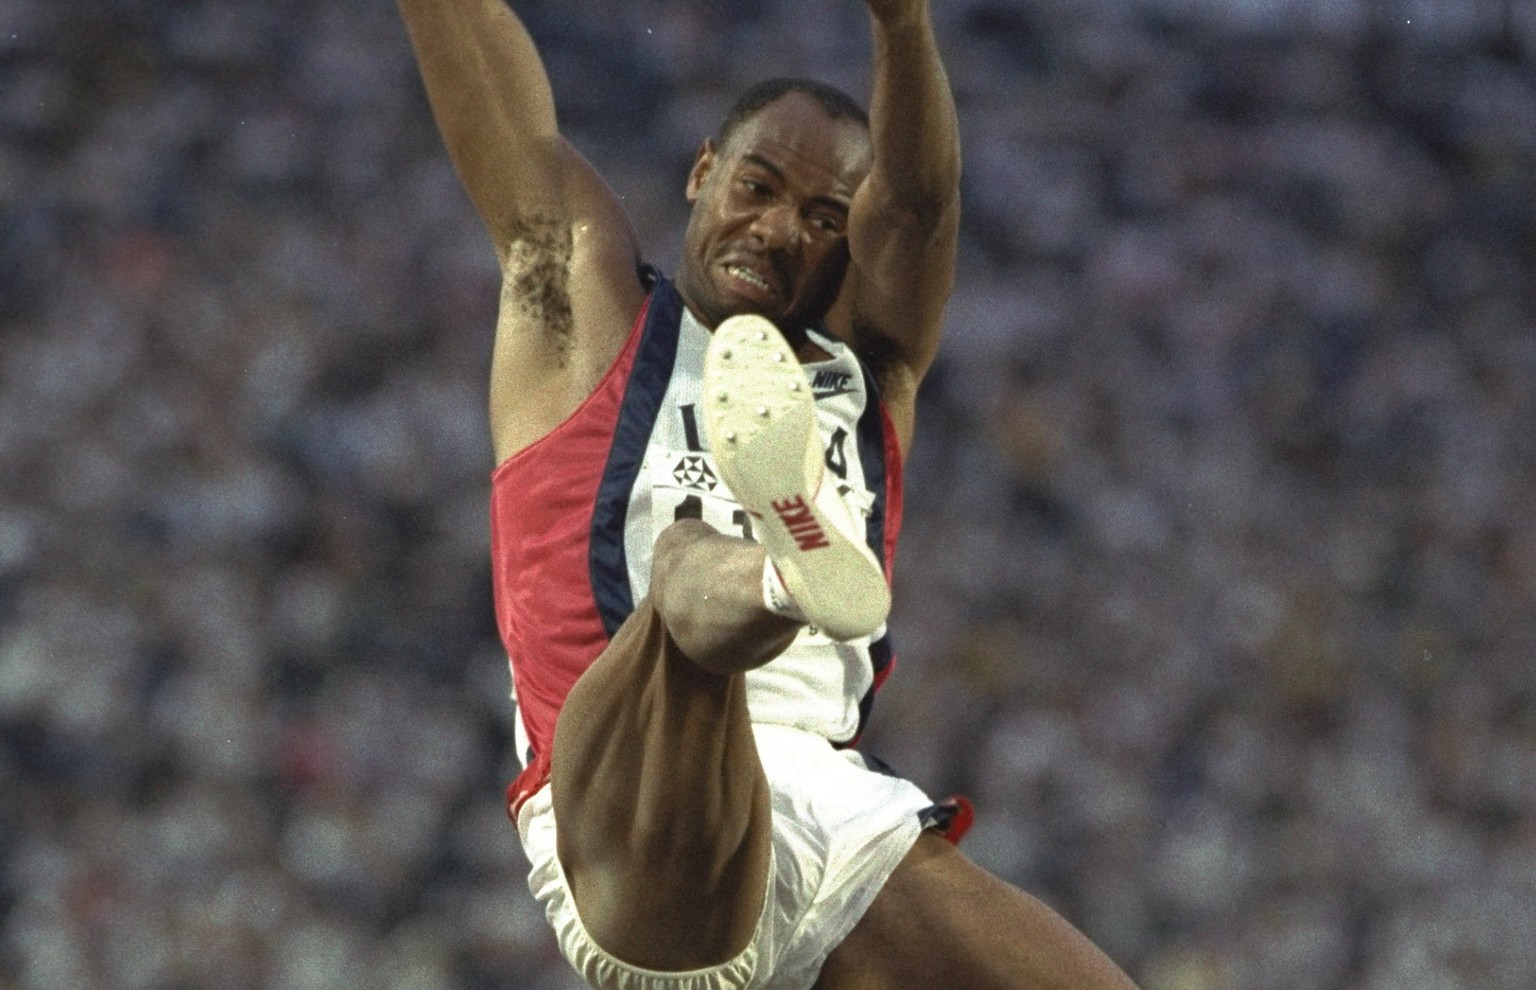 30 Aug 1991: Mike Powell of the USA in action during the Long Jump event at the 1991 World Championships in Tokyo. He won the event with a jump of 8.95 Metres. \ Mandatory Credit: Mike Powell/Allsport